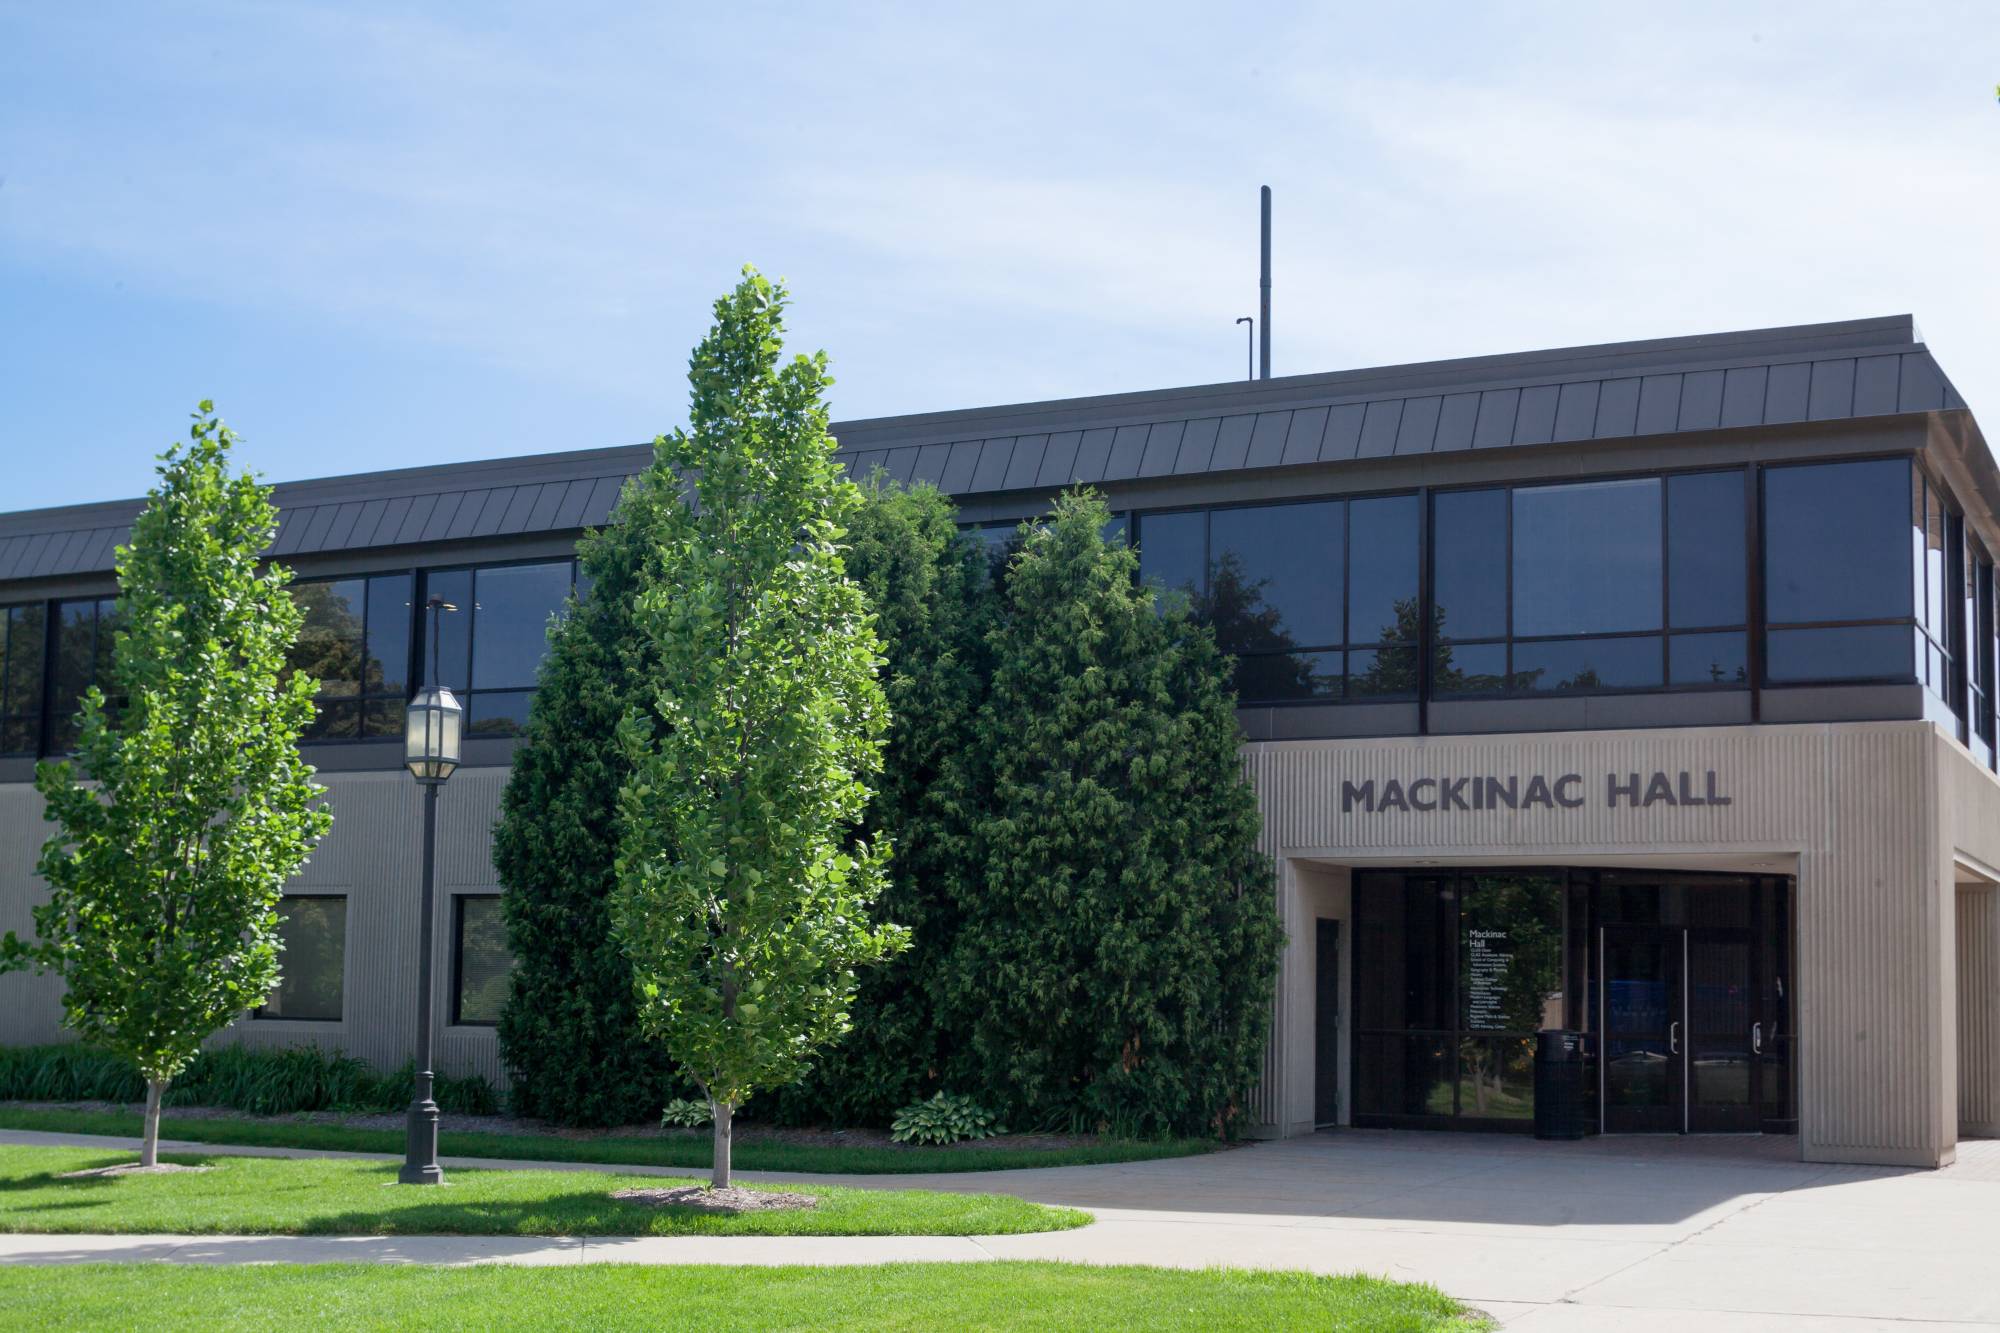 Mackinac Hall where the College of Liberal Arts and Sciences Advising is located.